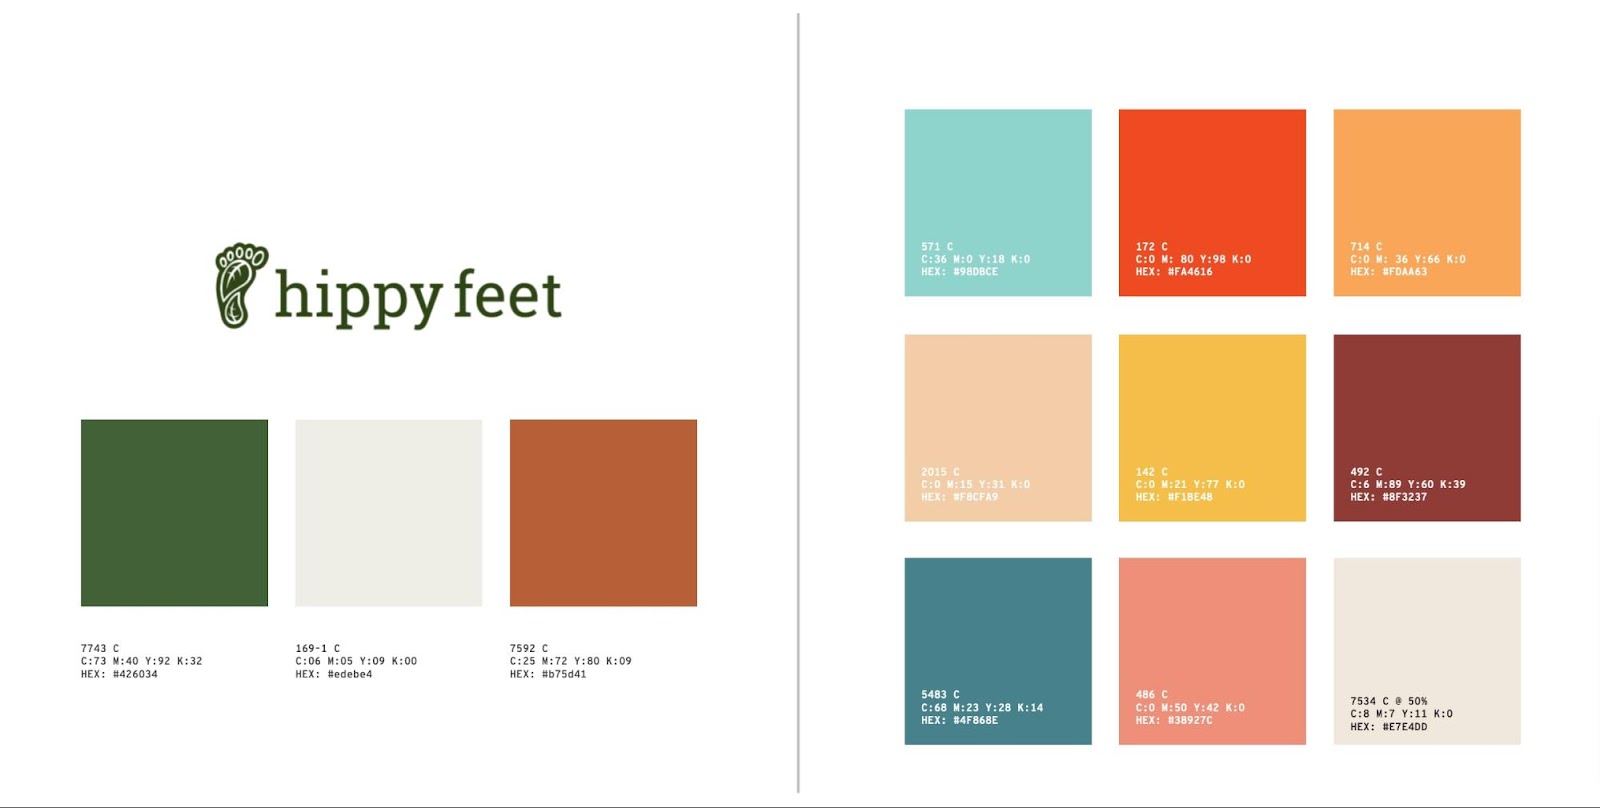 hippy feet style guide colors